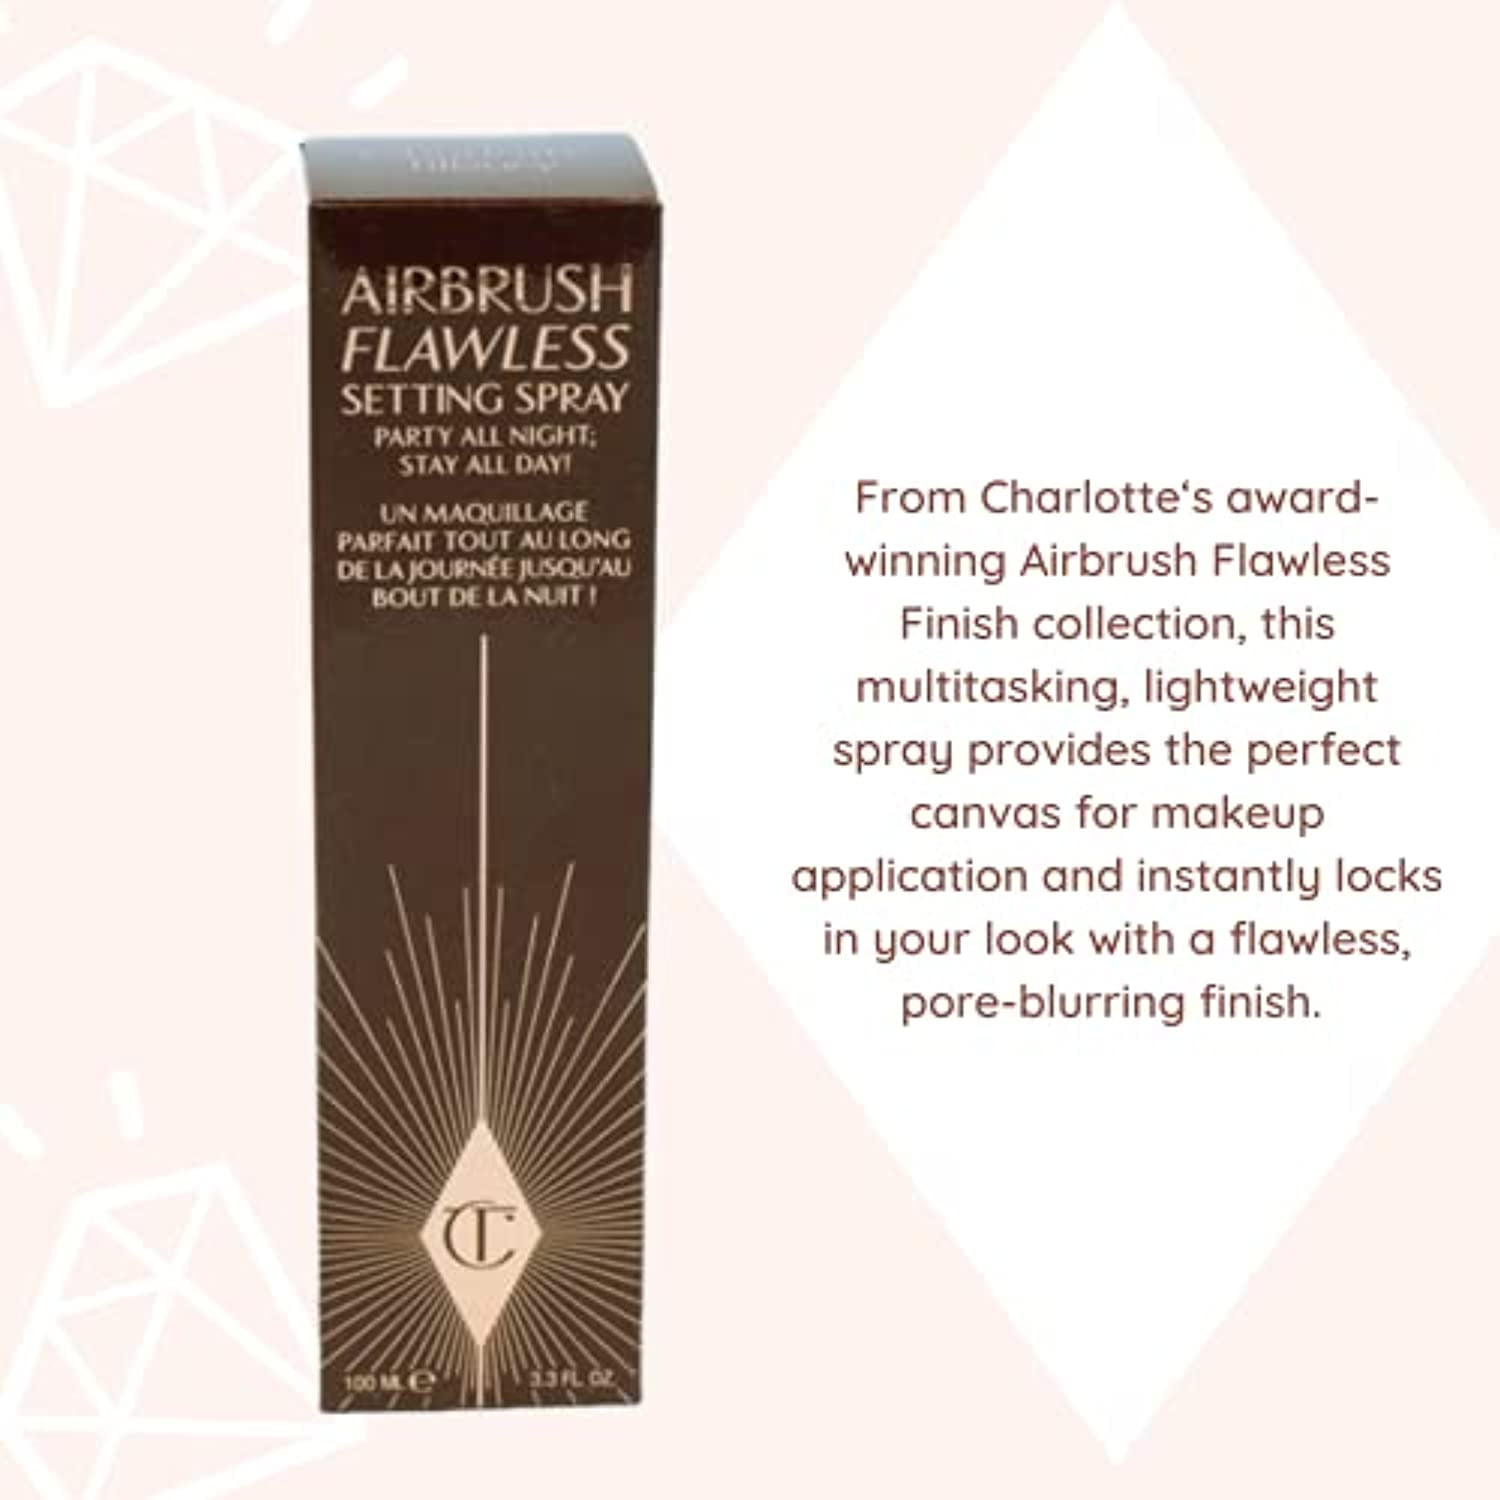 Charlotte's Airbrush Flawless Setting Spray Kit - one for you and one , Charlette Tilbury Flwales Setting Spray